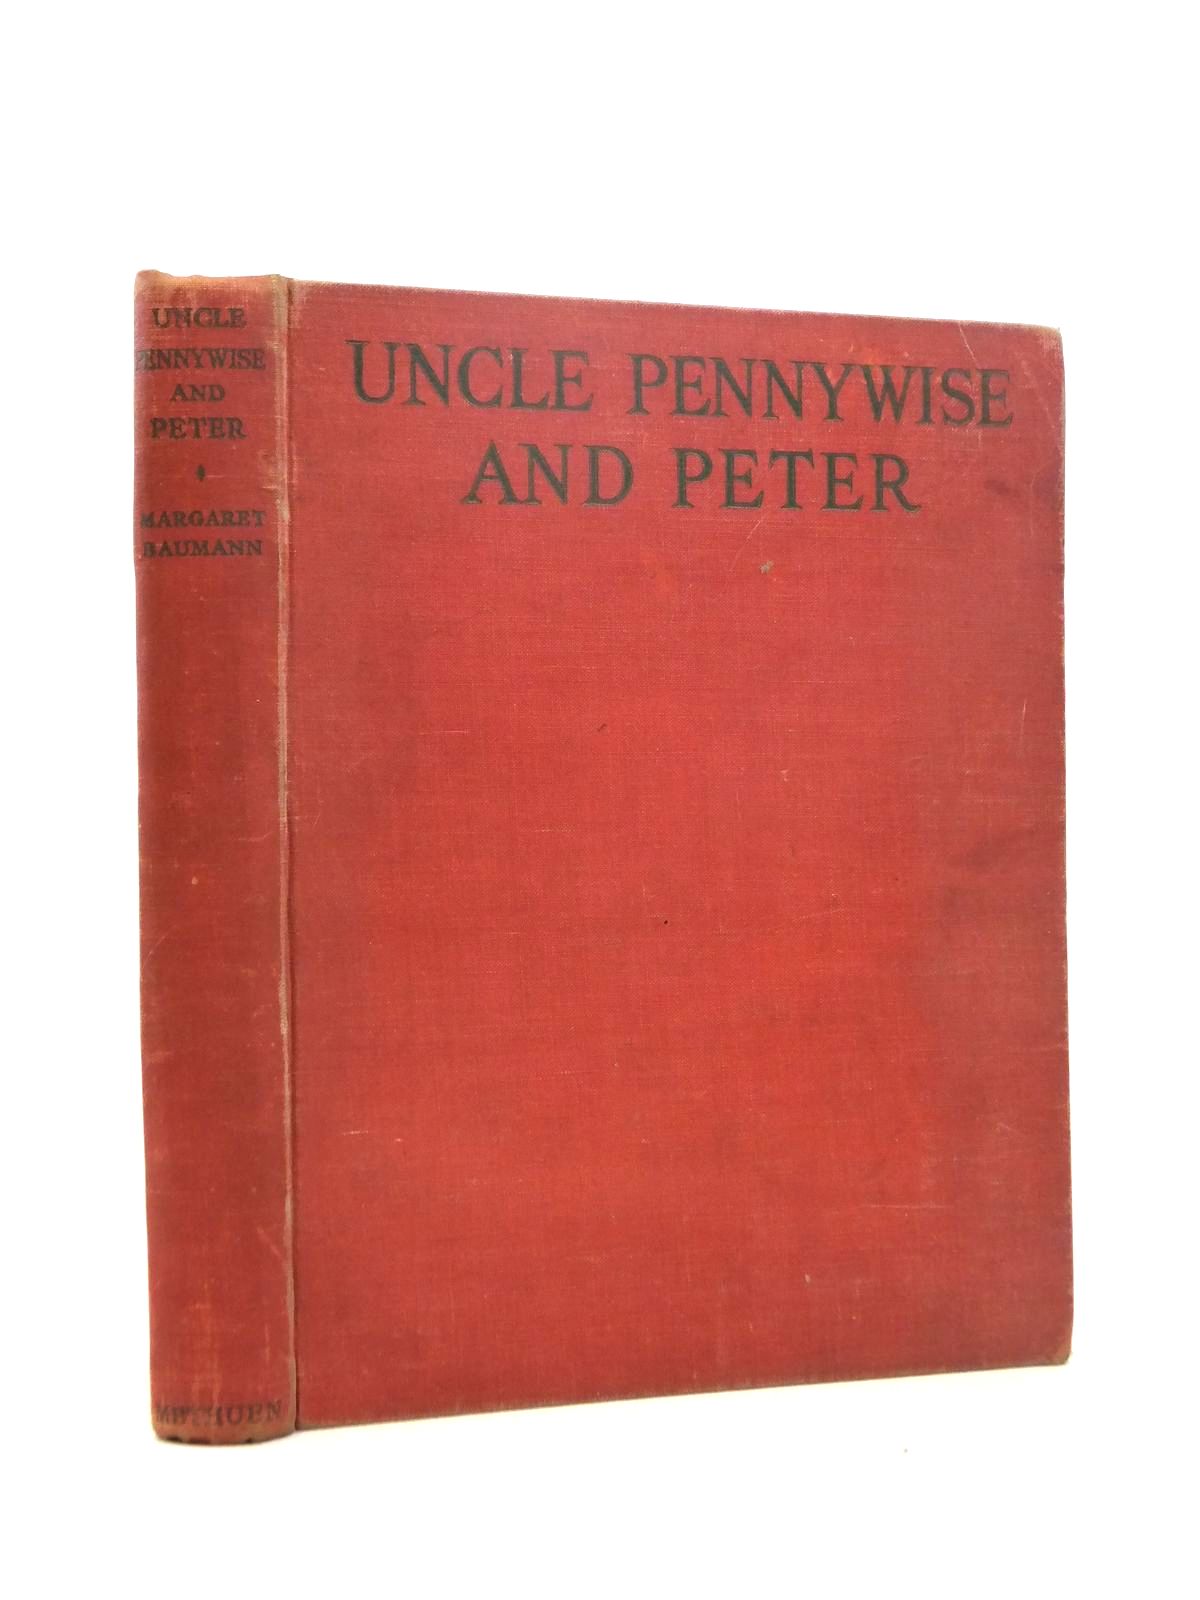 Photo of UNCLE PENNYWISE AND PETER written by Baumann, Margaret illustrated by Lees, Clifford published by Methuen &amp; Co. Ltd. (STOCK CODE: 1208555)  for sale by Stella & Rose's Books